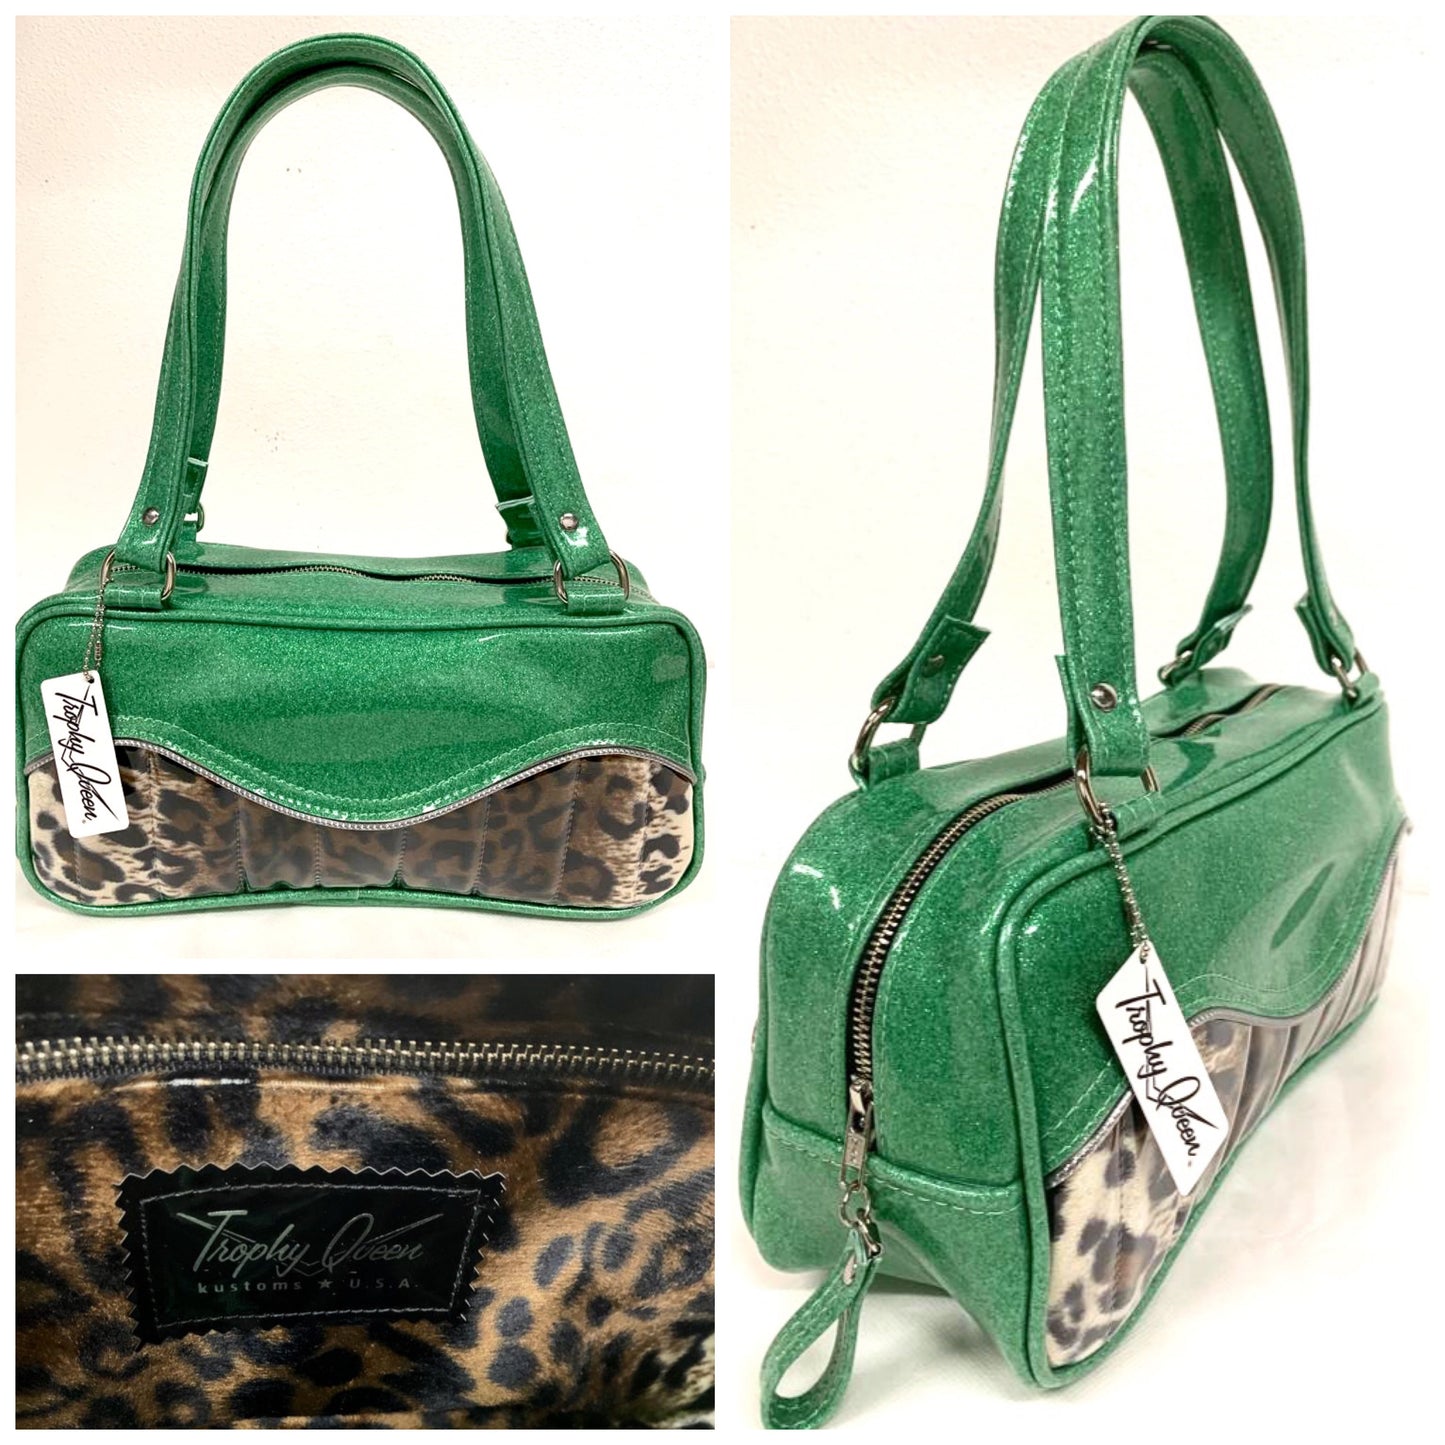 Tuck and Roll Shoulder Bag - Leopard with Clear / Sea Foam Green - Leopard Lining